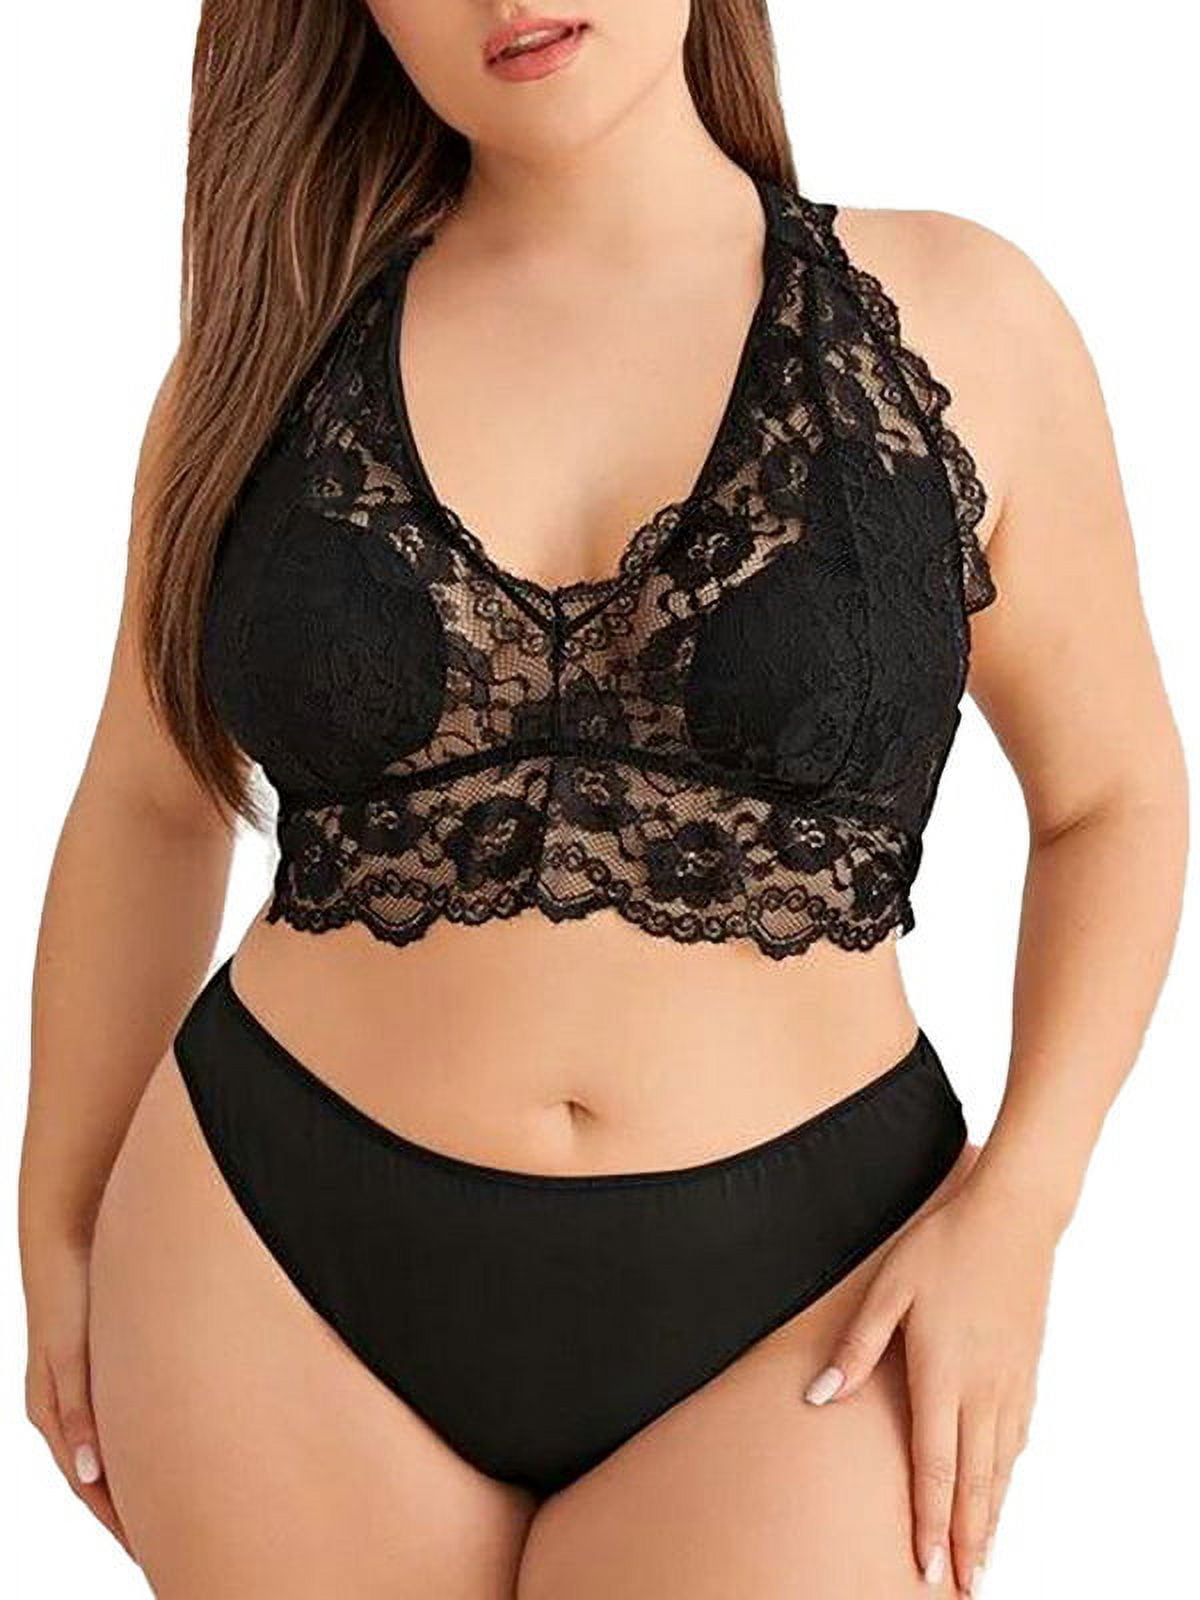 FASHIONWT Sexy Women's Embroidered Sheer Lingerie Two-Piece Bra Set 